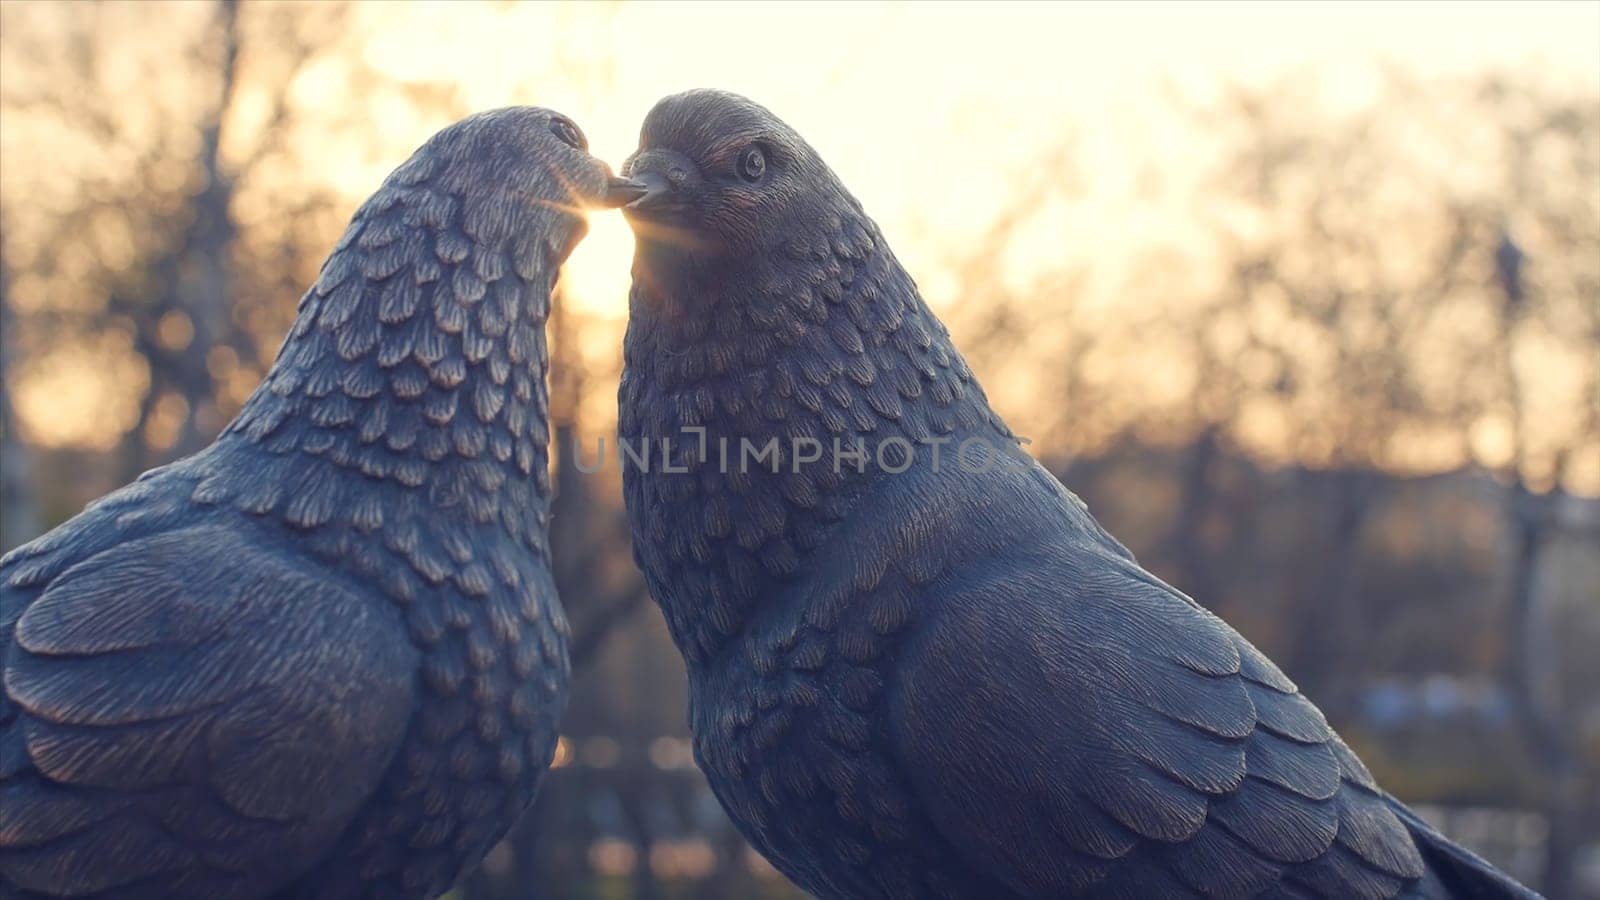 Pair of vintage white pigeon made of bronze and sun background. figurines pigeons made of metal. Two figurines of pigeons like a the monument of love. the monument of love made of bronze by Mediawhalestock